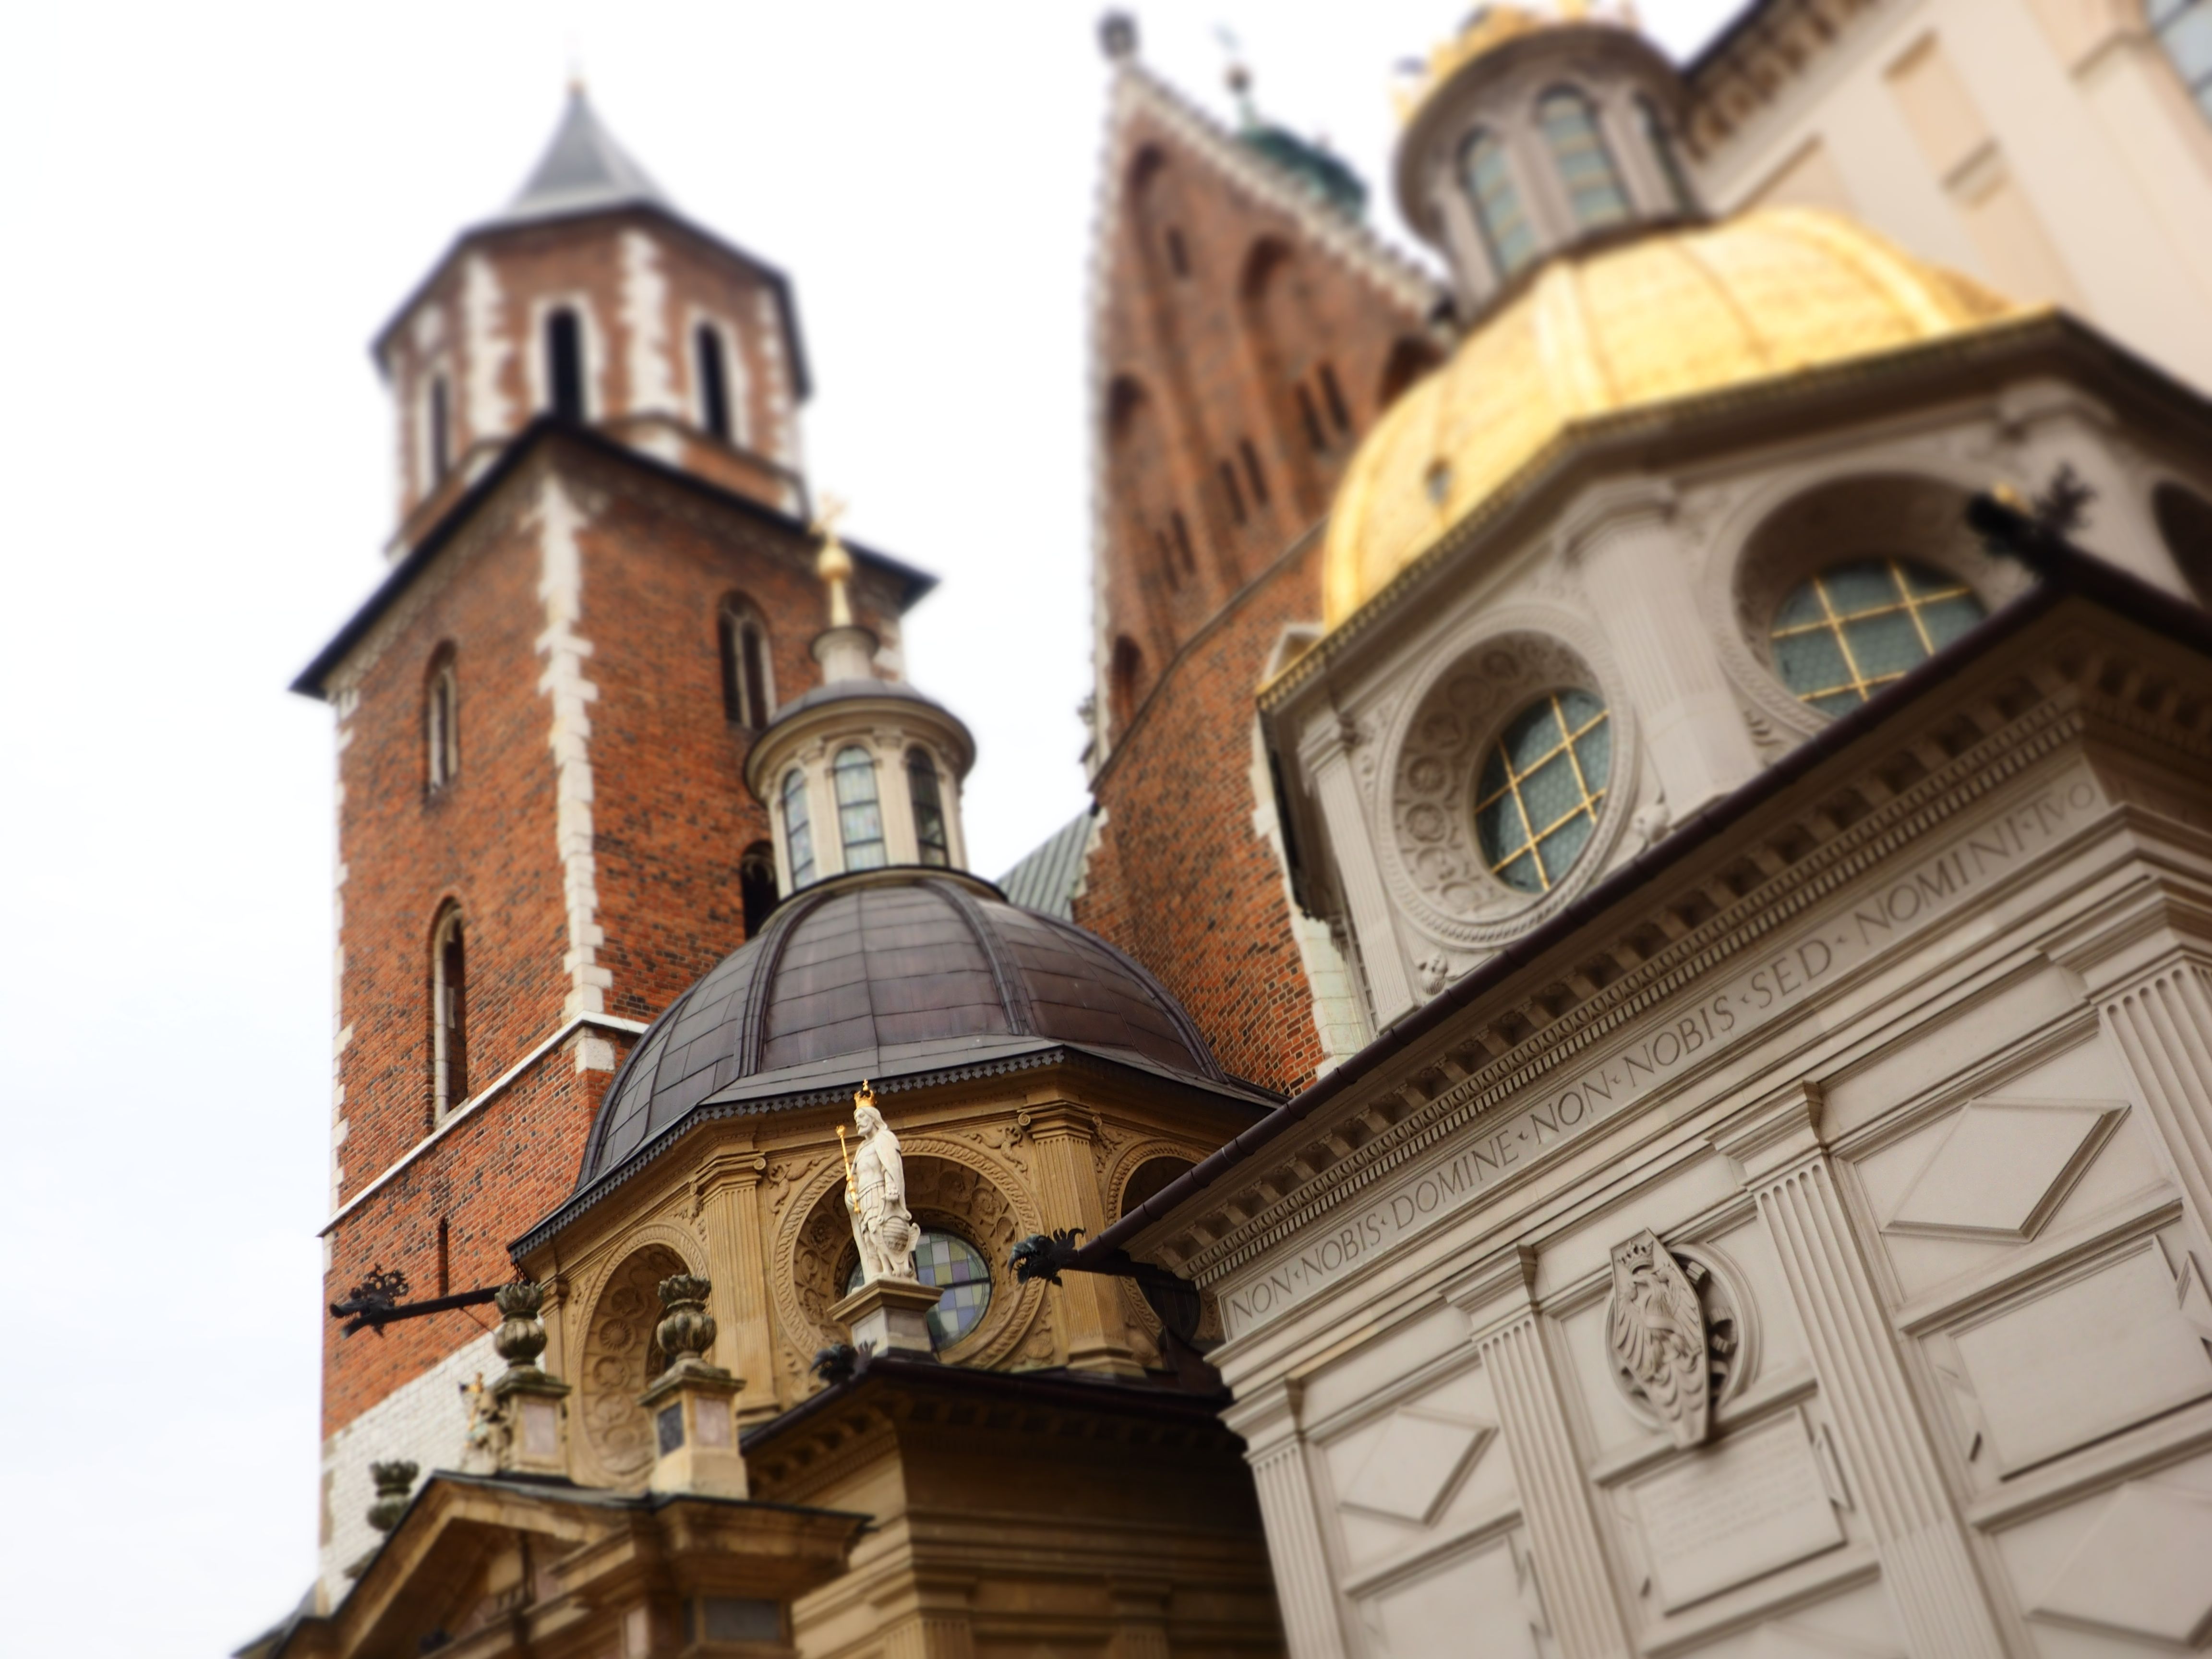 Wawel Castle with the Wawel Cathedral in the background. The castle is made up of many towers. Image: Alison Binney